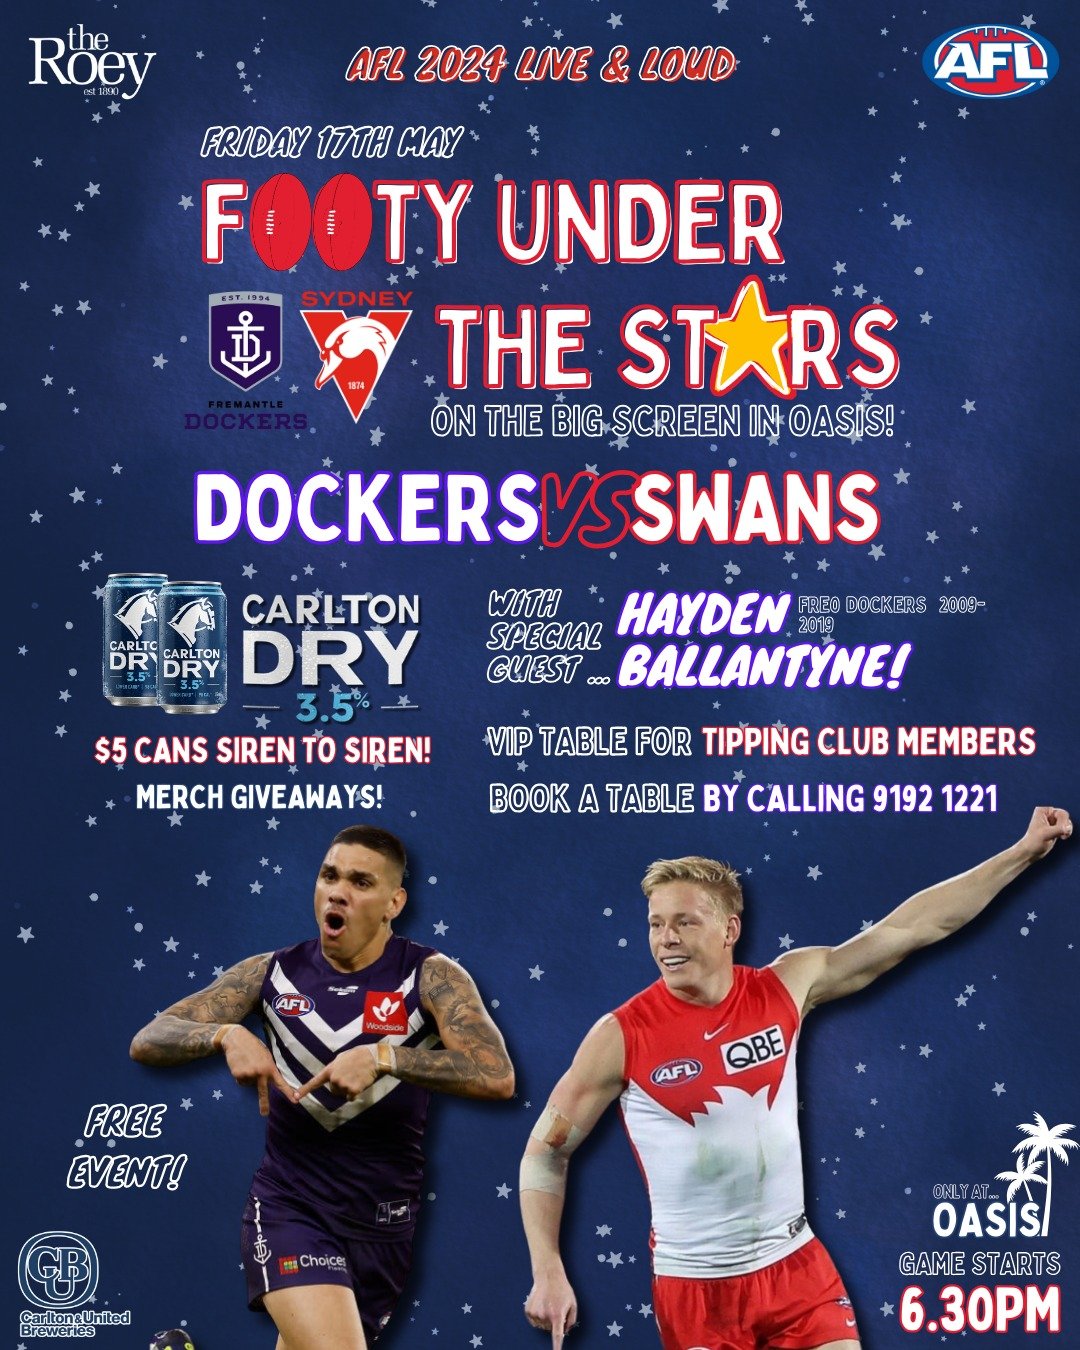 📣CALLING ALL FOOTY FANS📣

Join us this Friday 10th May for a very special FOOTY UNDER THE STARS 🏉✨ in Oasis from 6pm 🌴

Watch the 🟣DOCKERS VS SWANS🔴 on the biiiig screen &amp; even bigger sound system 🔊 commentary so crisp you'd think you were